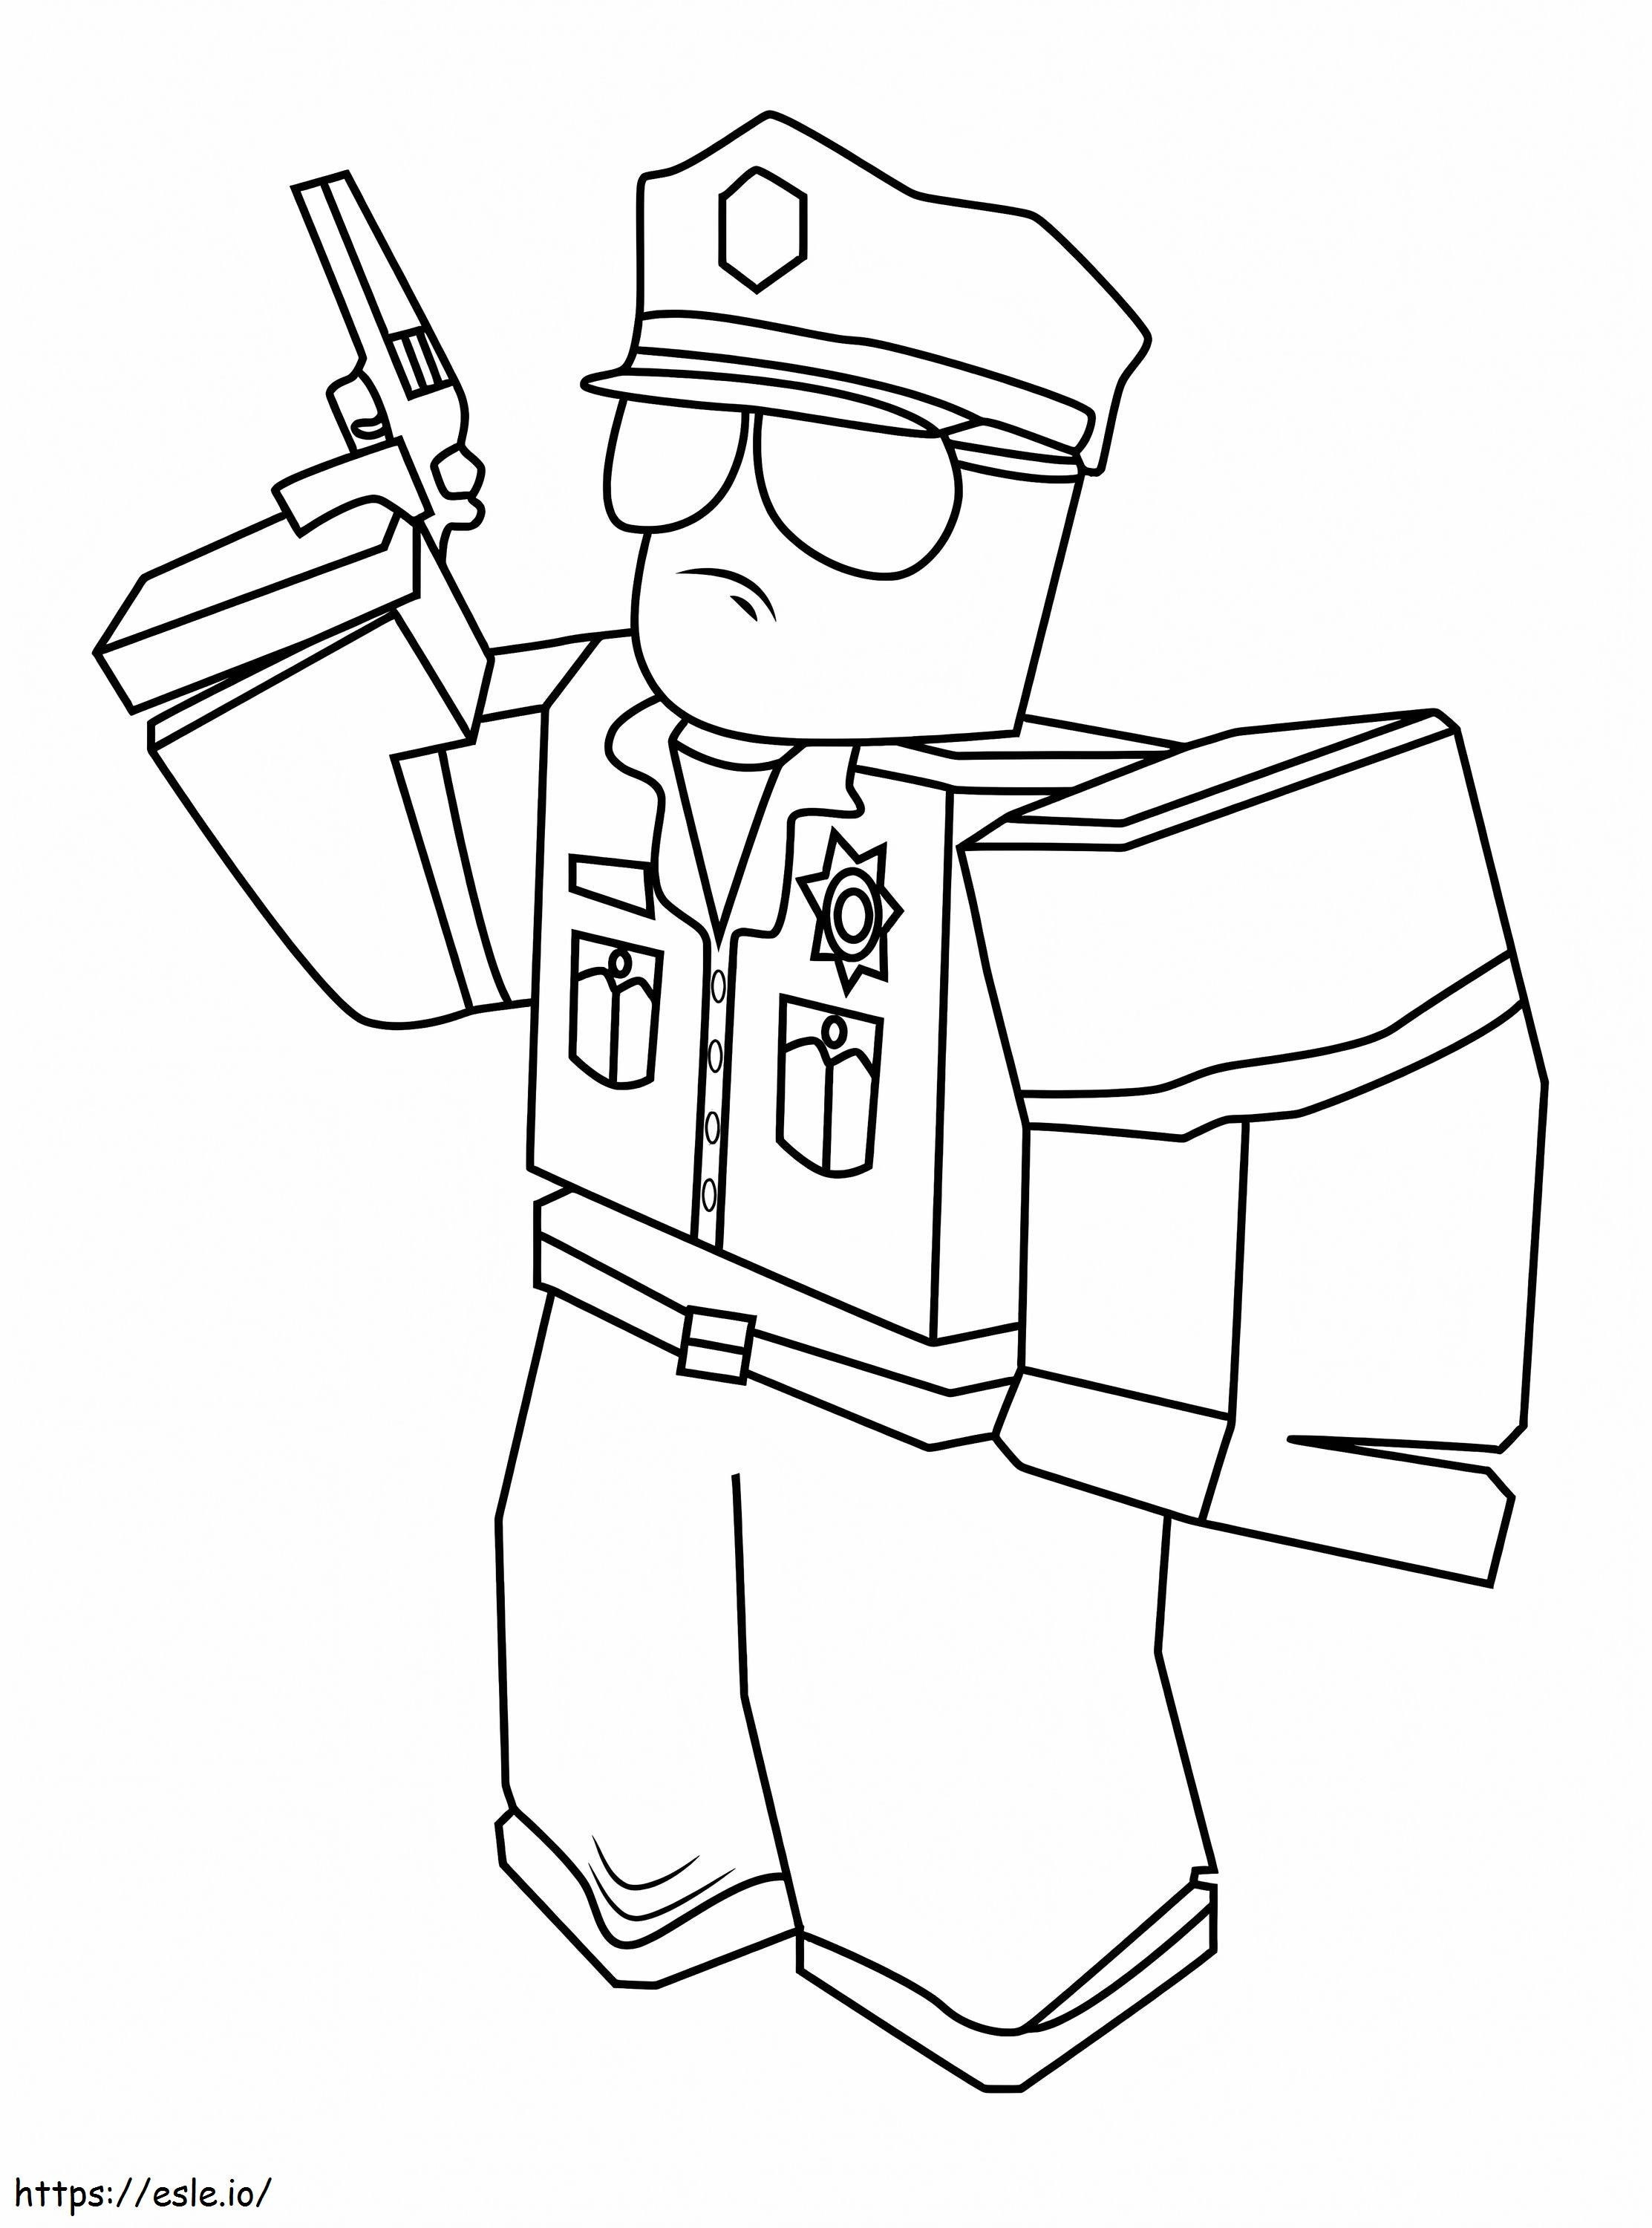 Roblox Police With Gun coloring page